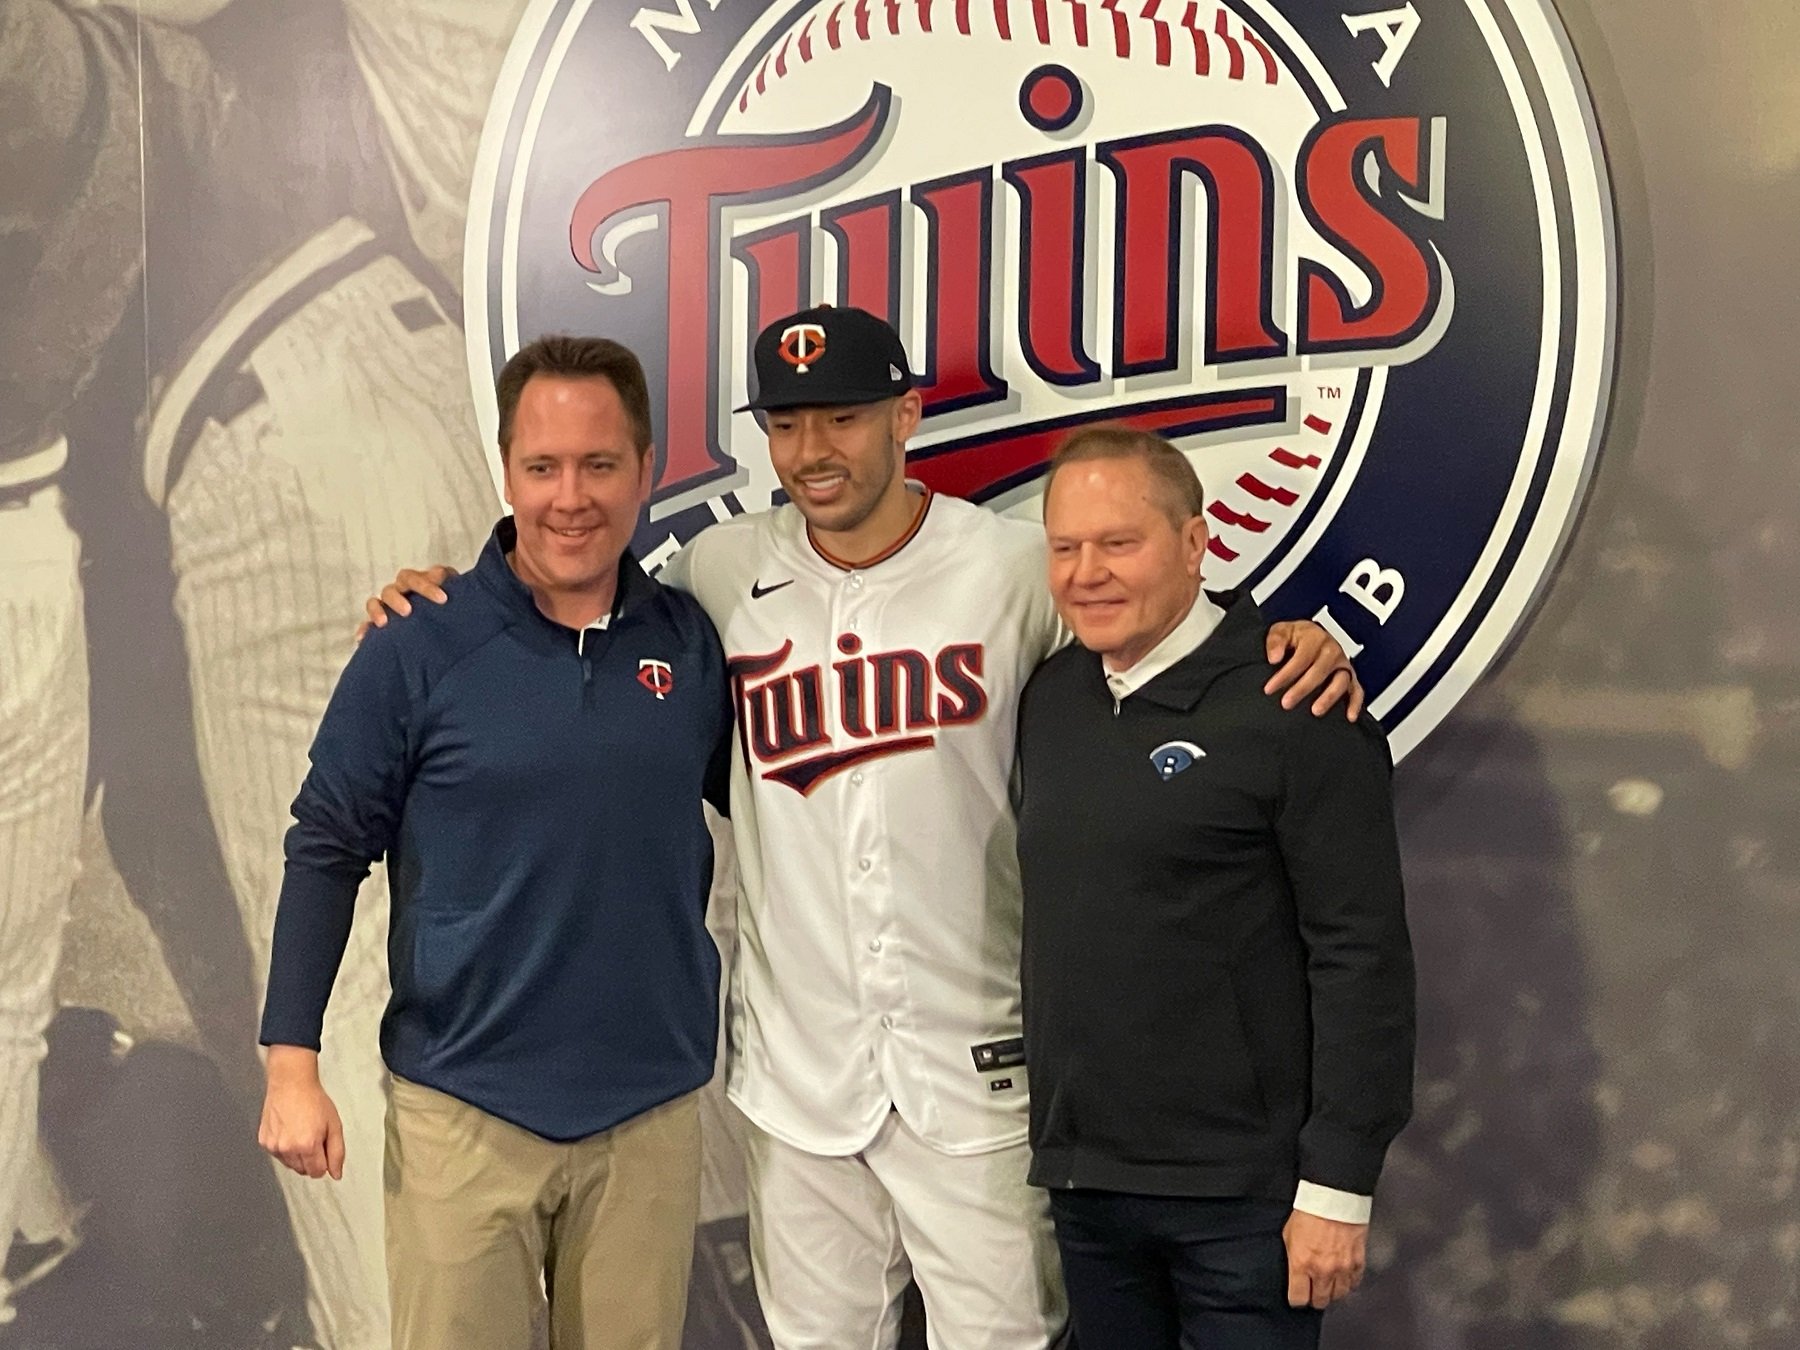 WATCH: Twins officially welcome Carlos Correa 